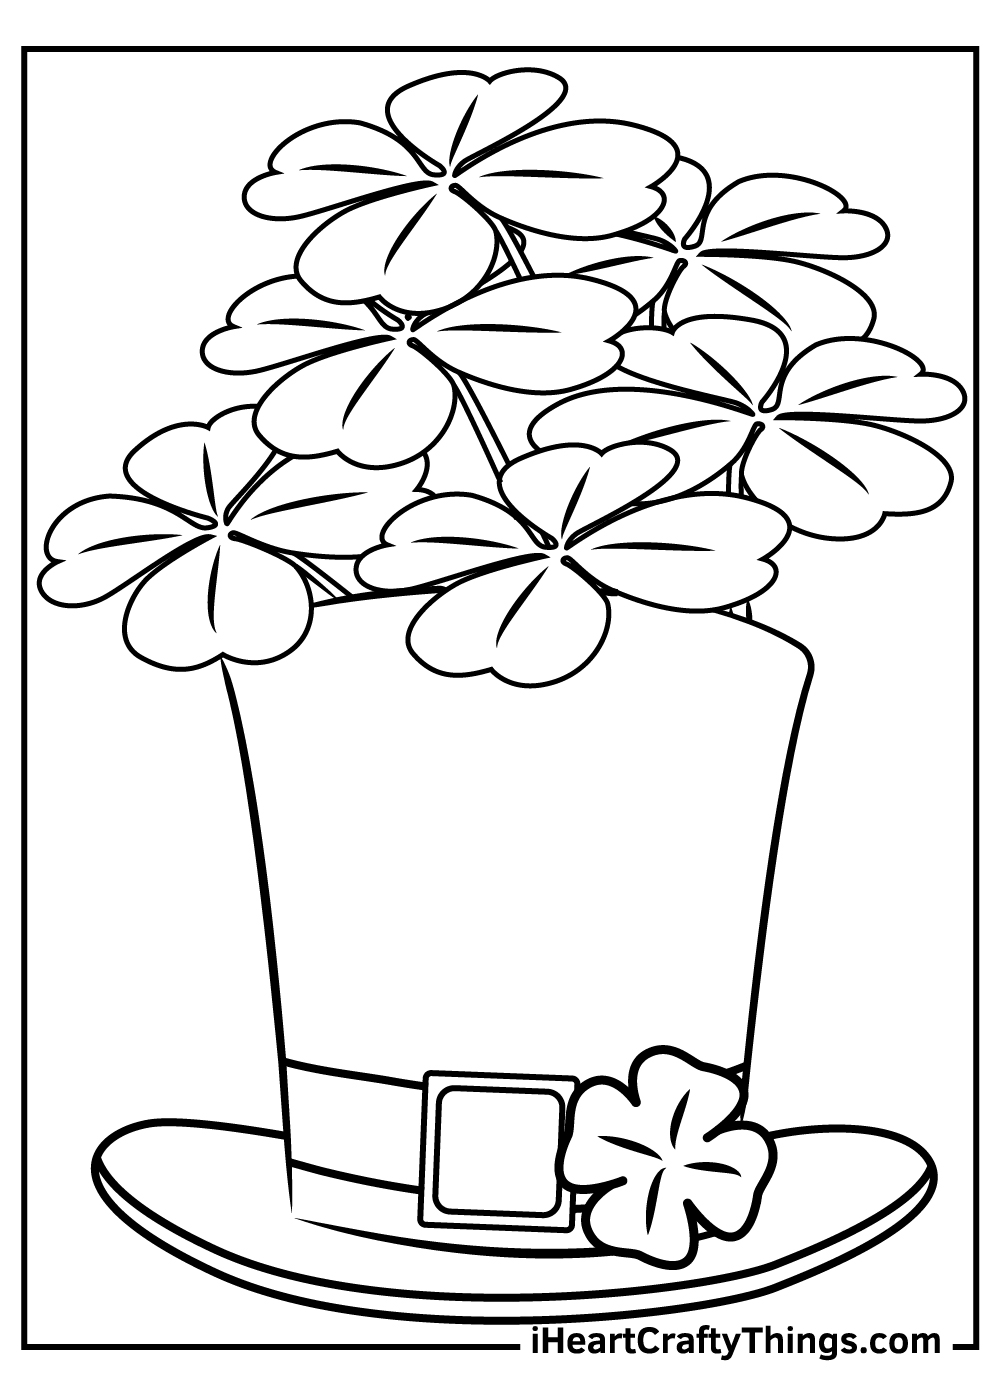 Shamrock coloring pages updated